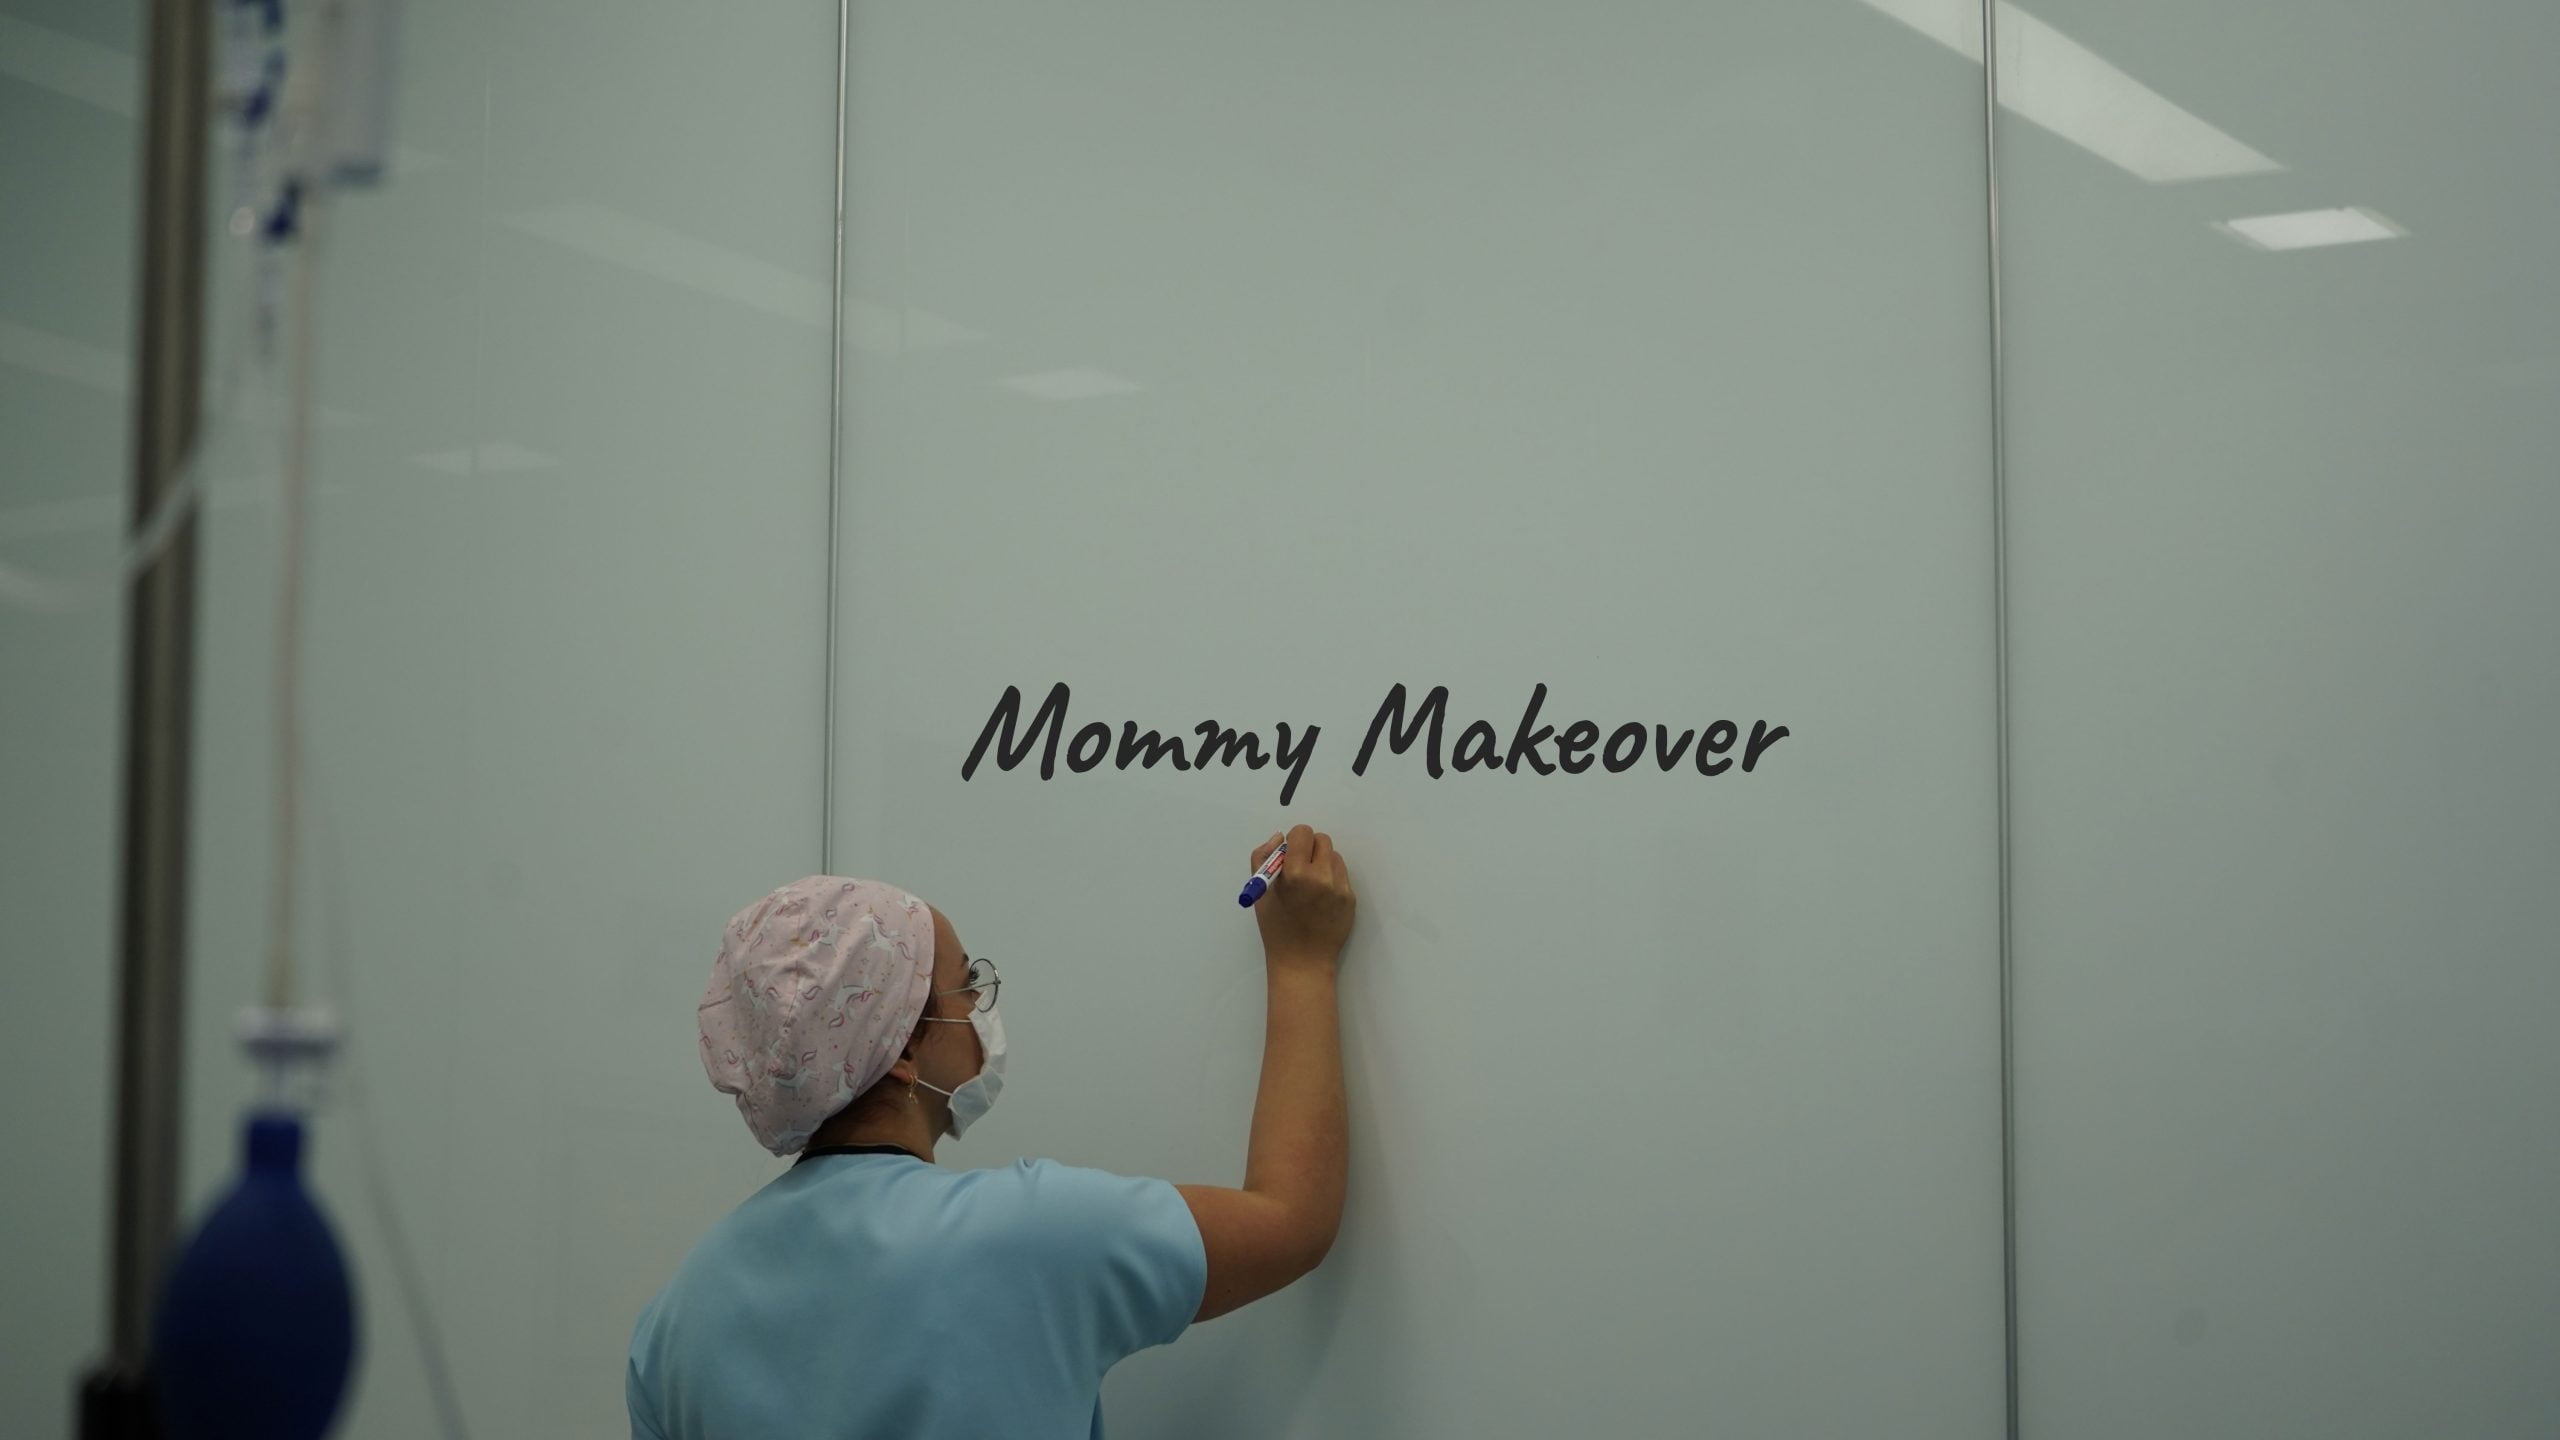 Mommy Makeover in Turkey